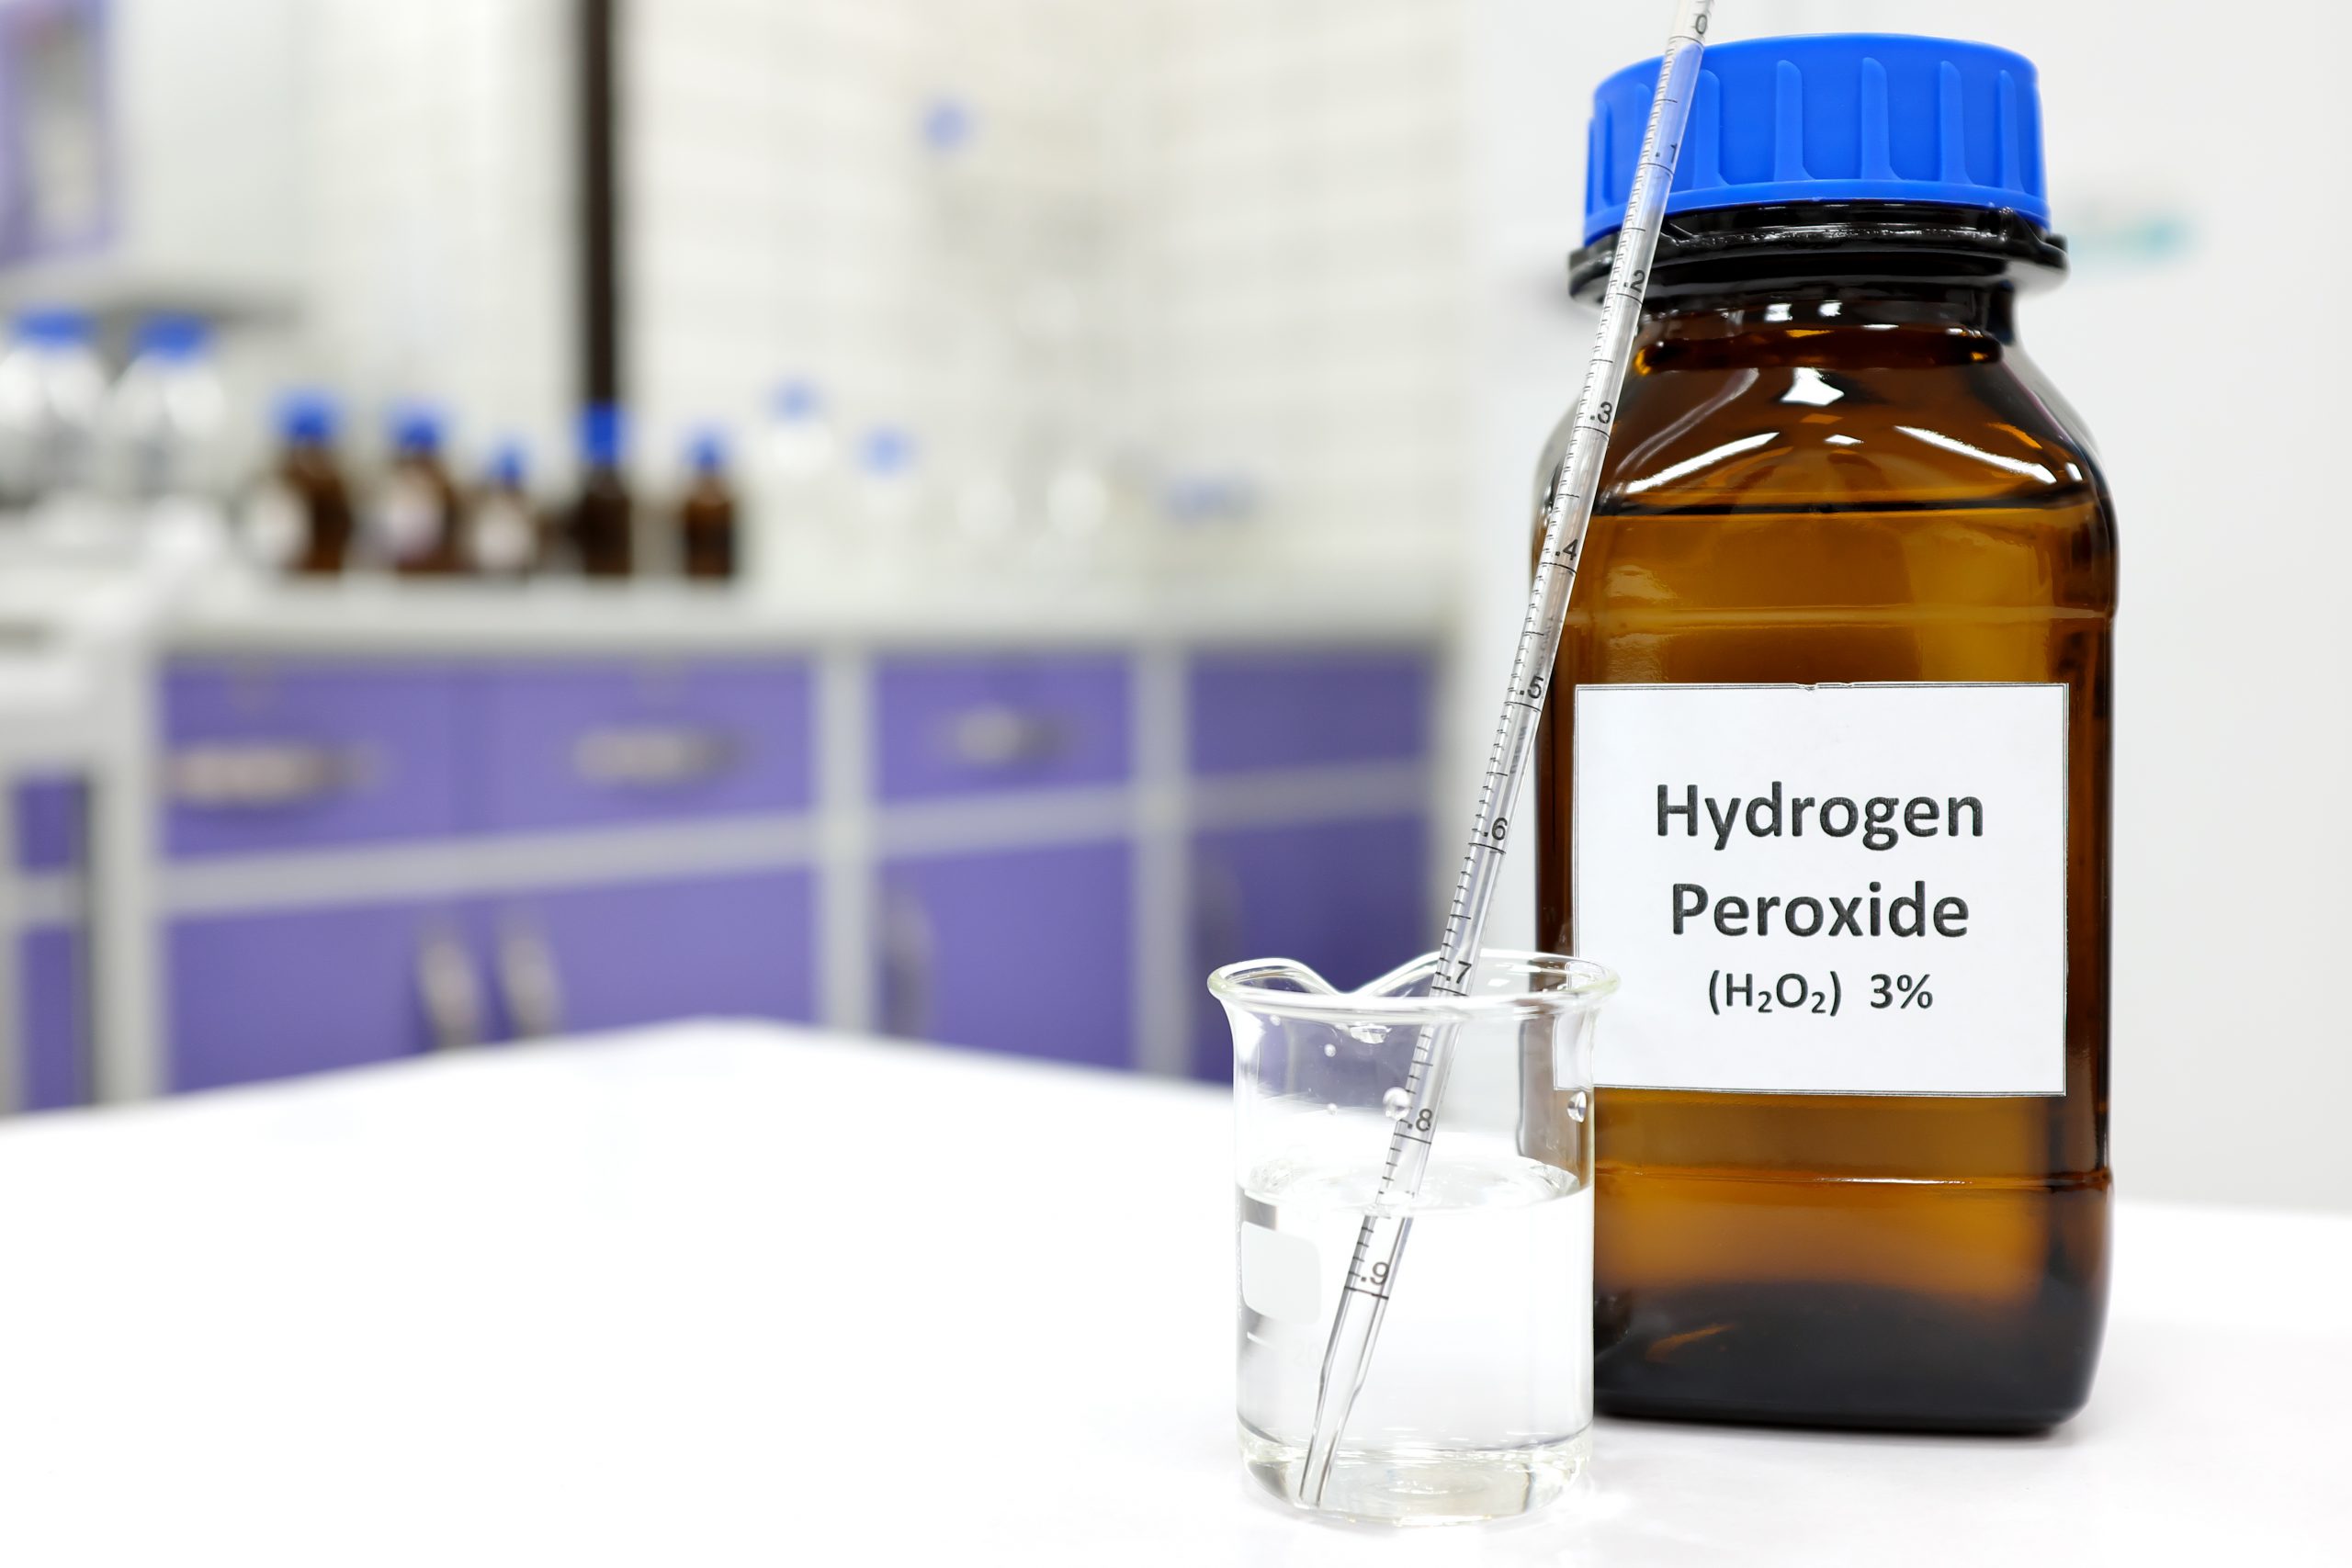 Hydrogen peroxide’s role in the treatment of toenail fungus